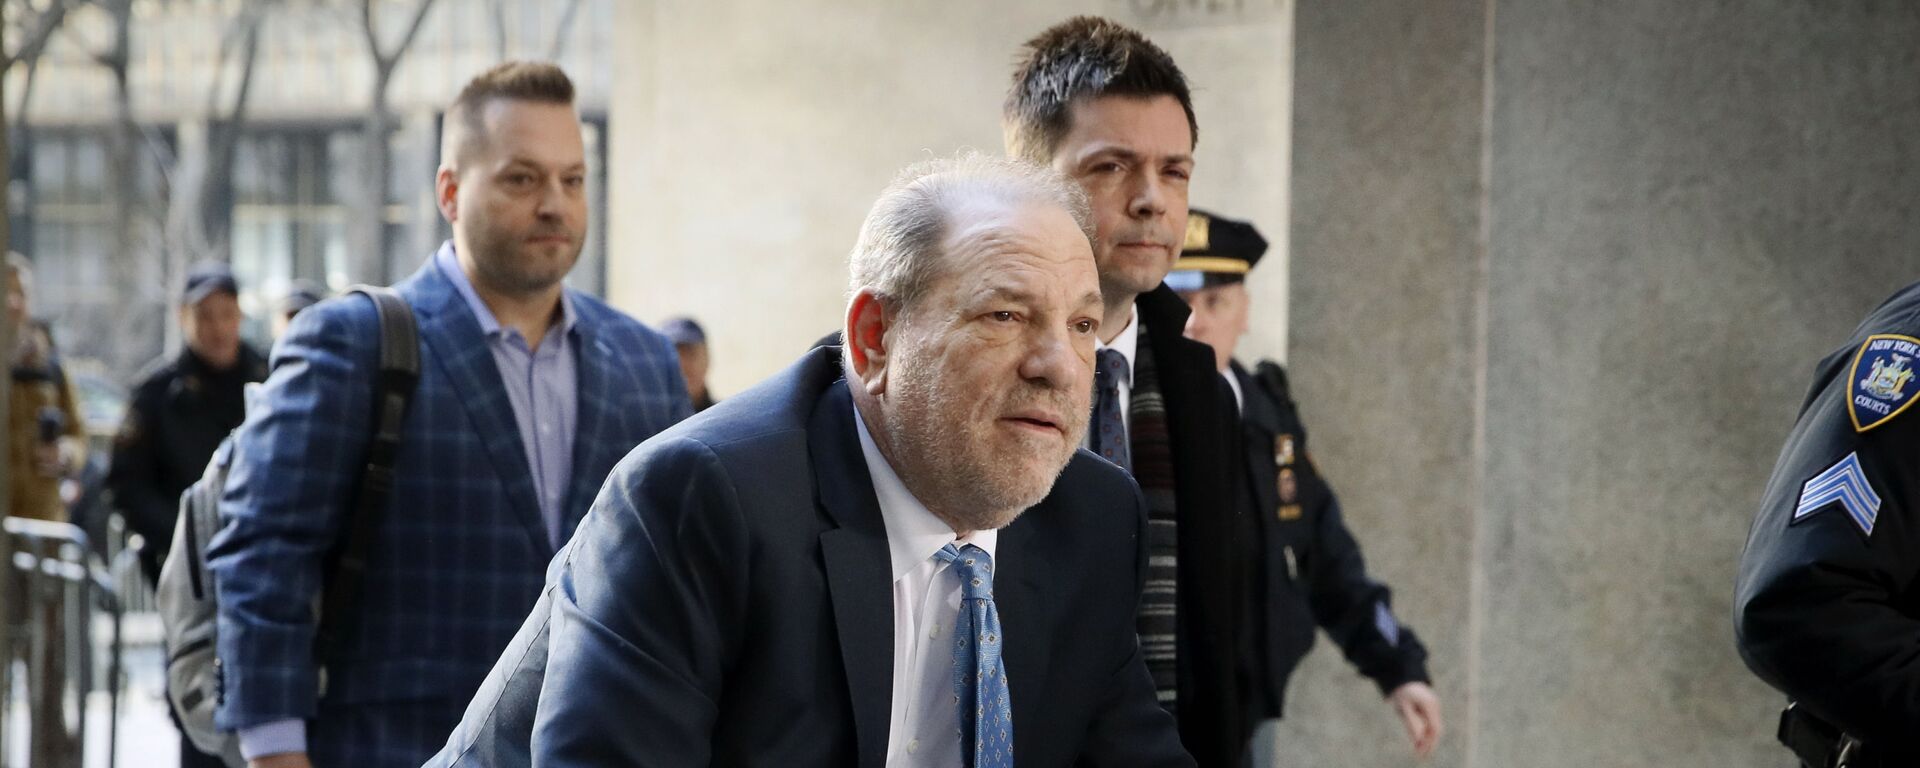 Harvey Weinstein arrives at a Manhattan courthouse as jury deliberations continue in his rape trial, Monday, Feb. 24, 2020, in New York. - Sputnik International, 1920, 25.07.2022